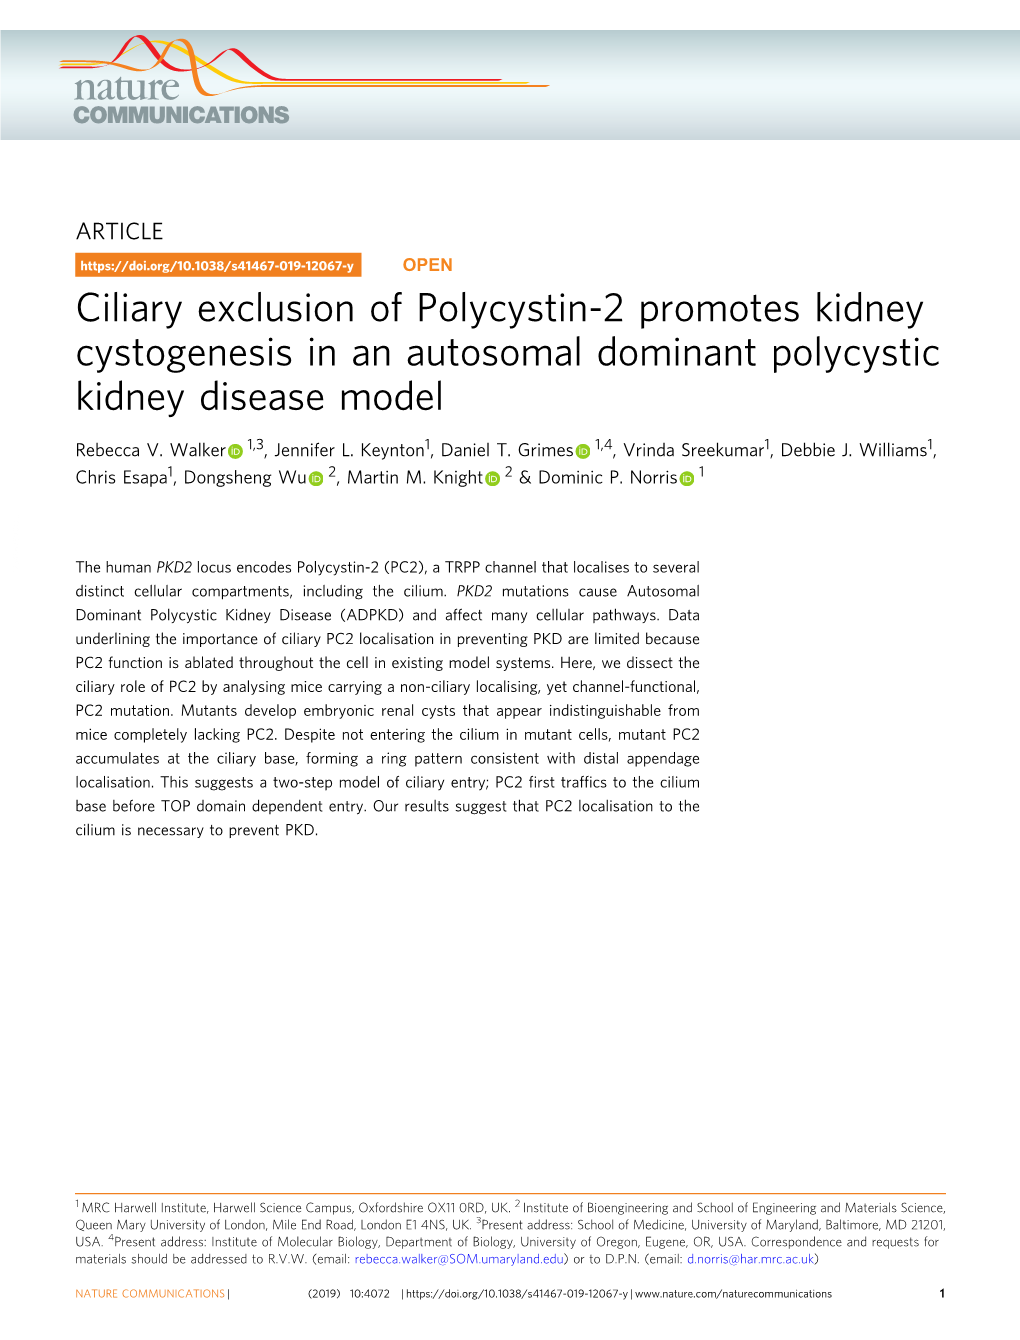 Ciliary Exclusion of Polycystin-2 Promotes Kidney Cystogenesis in an Autosomal Dominant Polycystic Kidney Disease Model